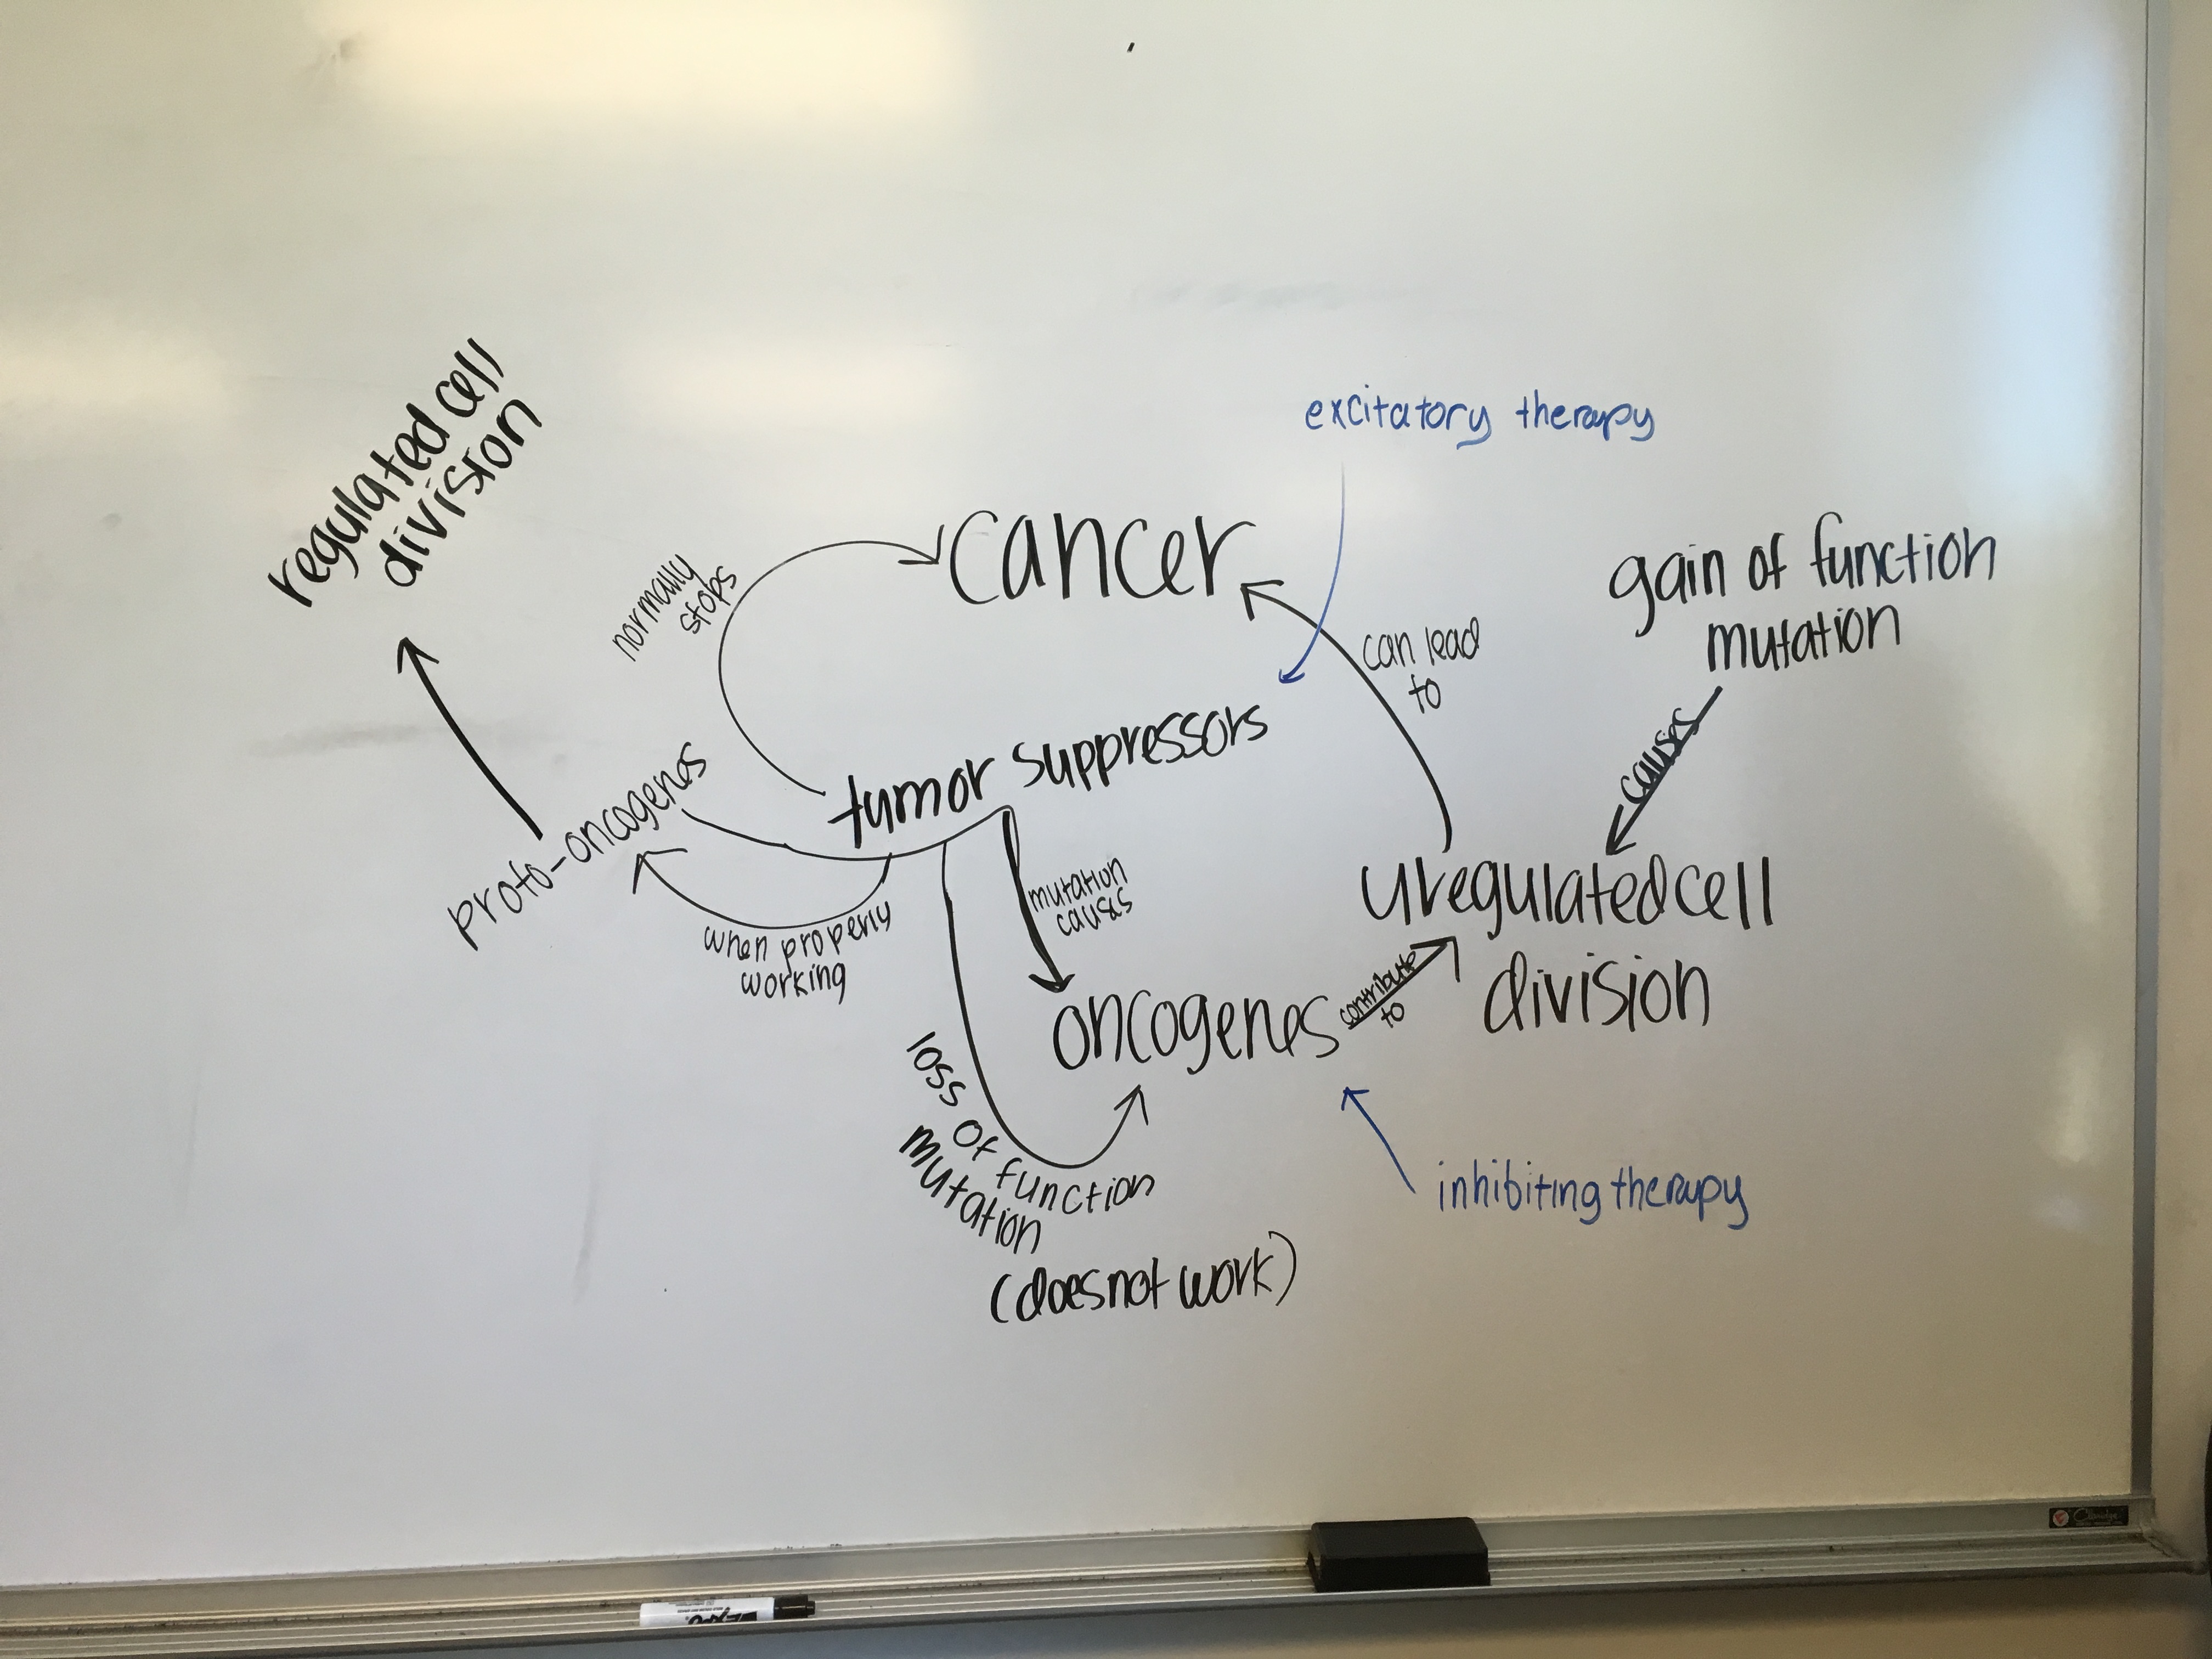 GMC: Genes, Mutations and Cancer - Group Concept Map Development